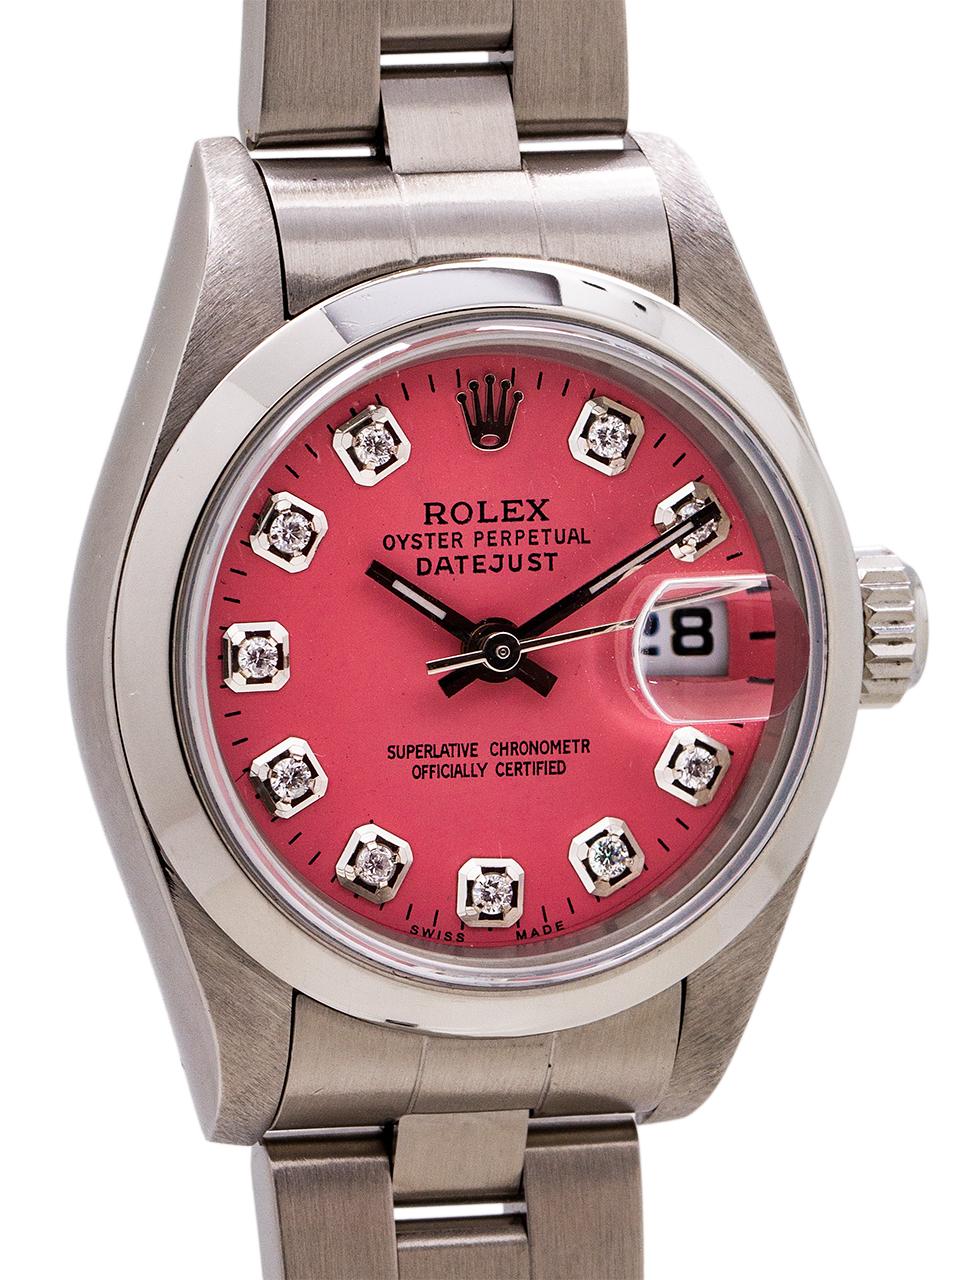 
Lady Rolex Datejust ref 179160 stainless steel 26mm diameter case with smooth domed bezel and sapphire crystal. Custom made pink diamond dial with sweep second hand and date at 3 o’clock. Powered by self winding movement with quick set date. With